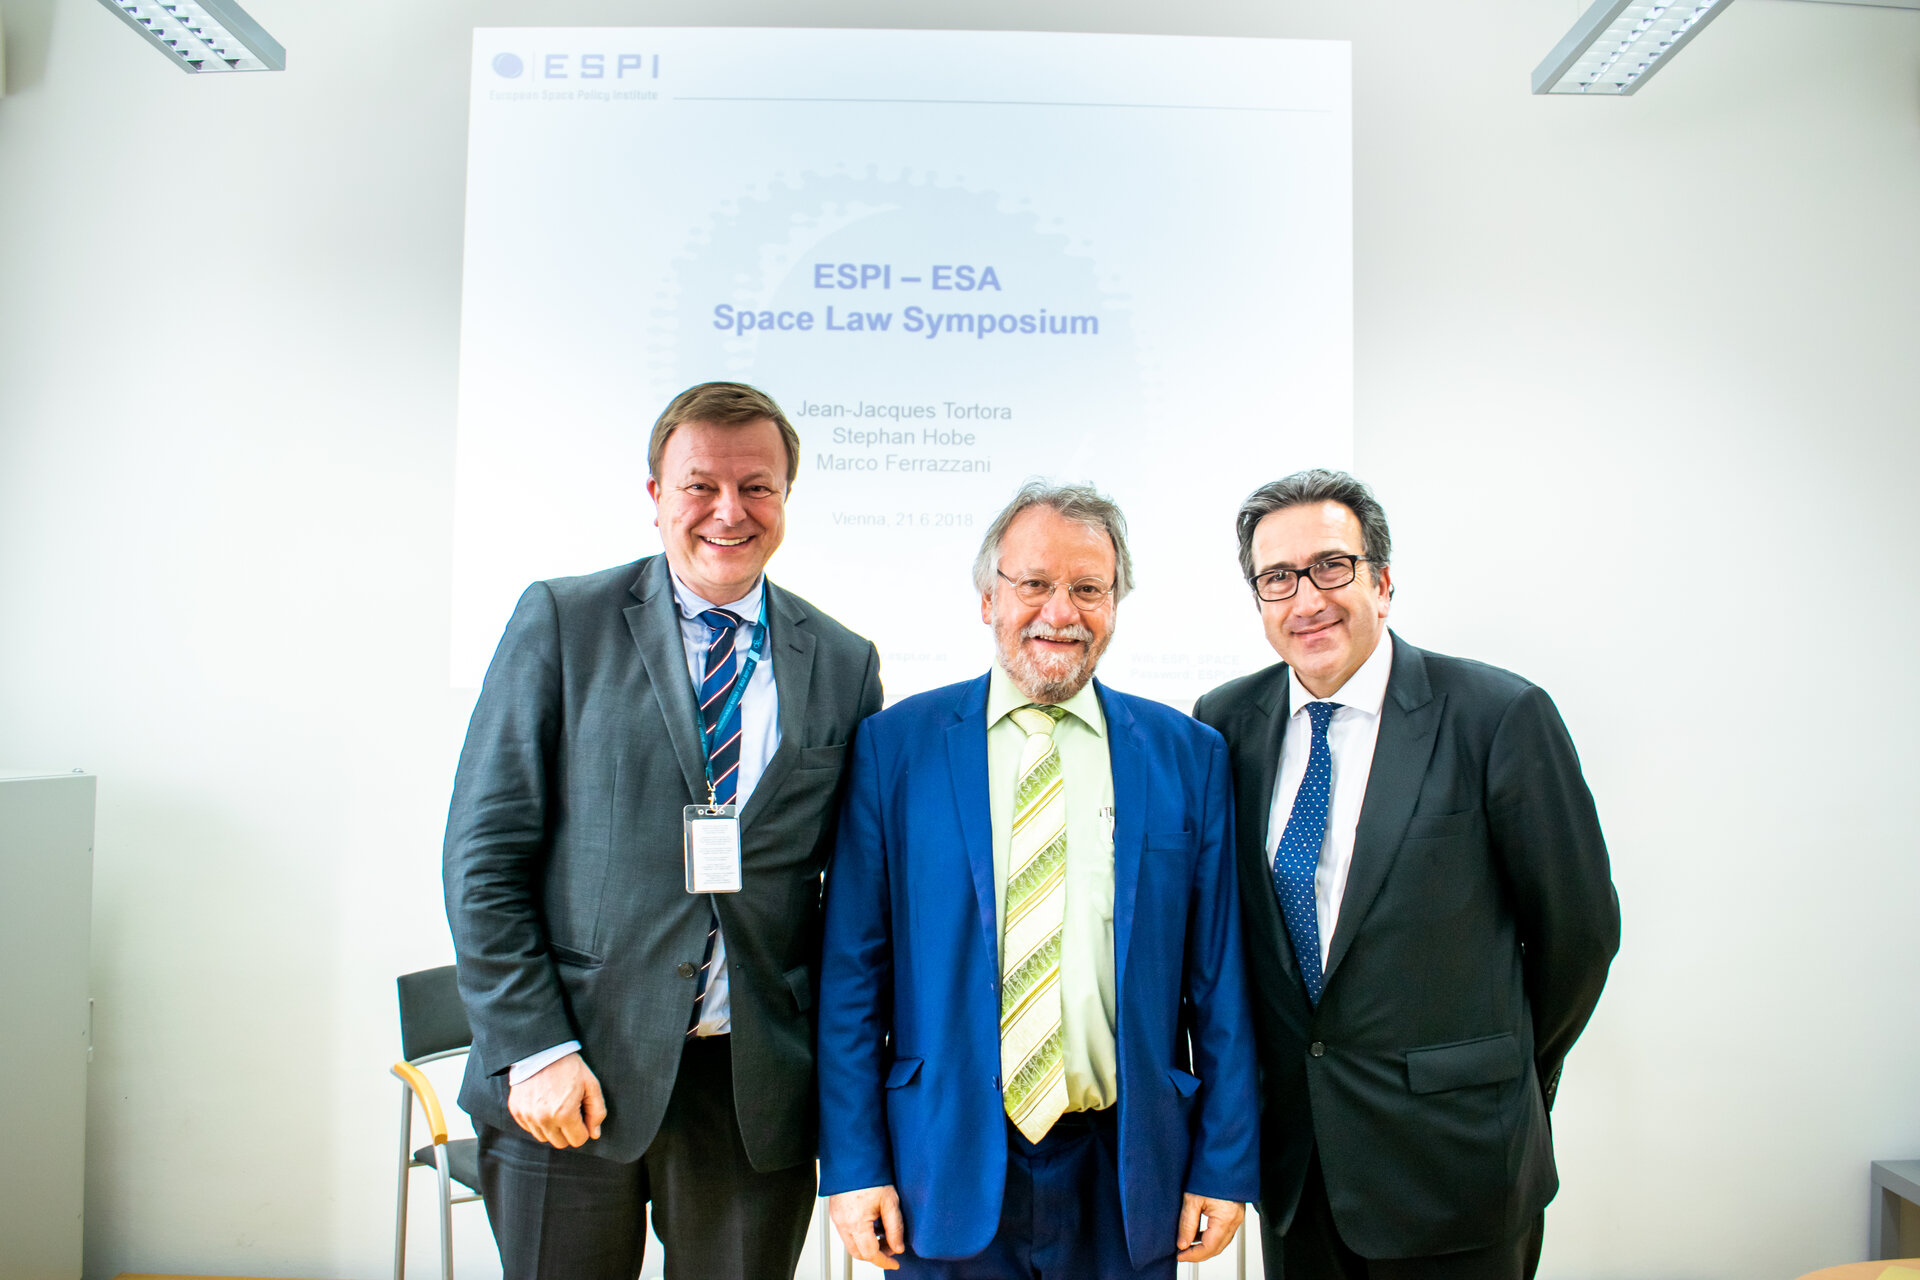 From the left, Prof. Stephan Hobe, Jean-Jacques Tortora and Dr. Marco Ferrazzani 